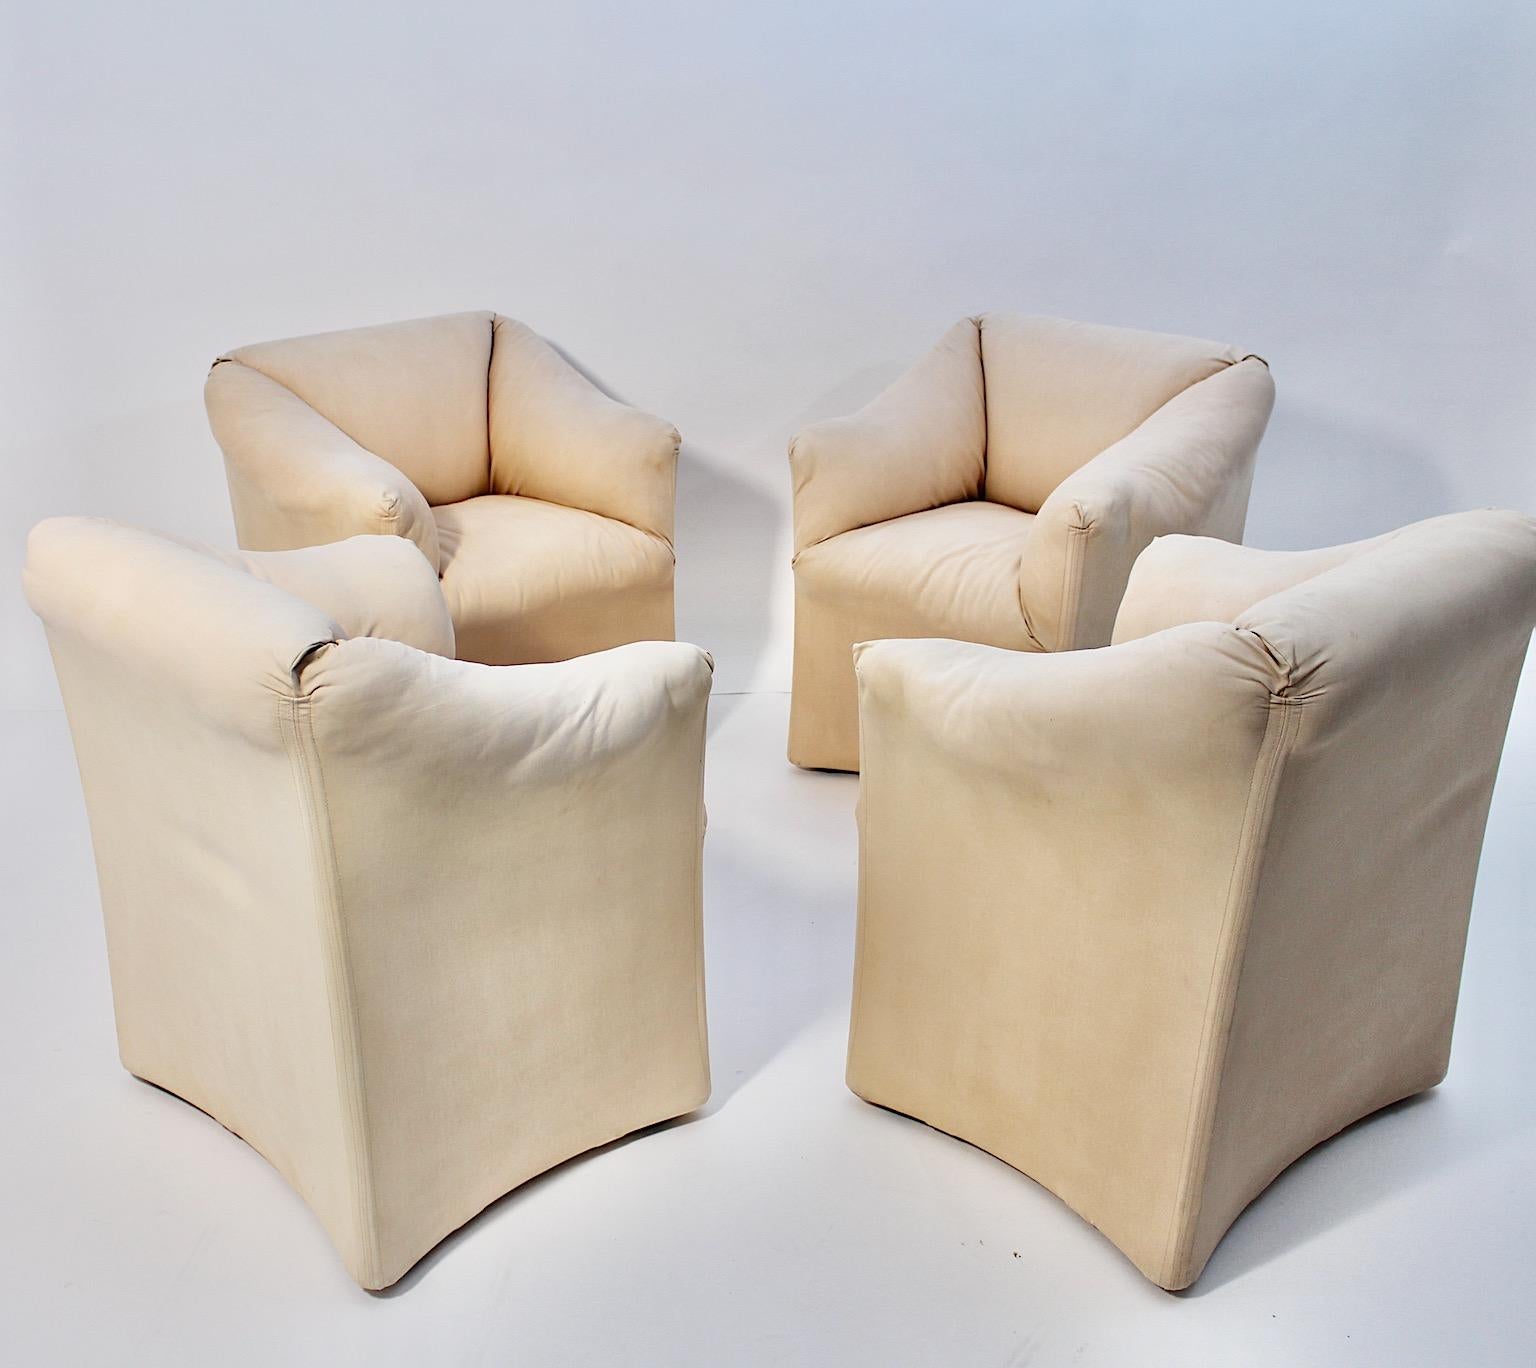 Modern vintage four ( 4 ) dining room chairs or armchairs by Mario Bellini for Cassina 1970s Italy.
An amazing set of four dining room chairs or armchairs model Tentazione designed by Mario Bellini for Cassina 1970s.
These very comfortable and lush